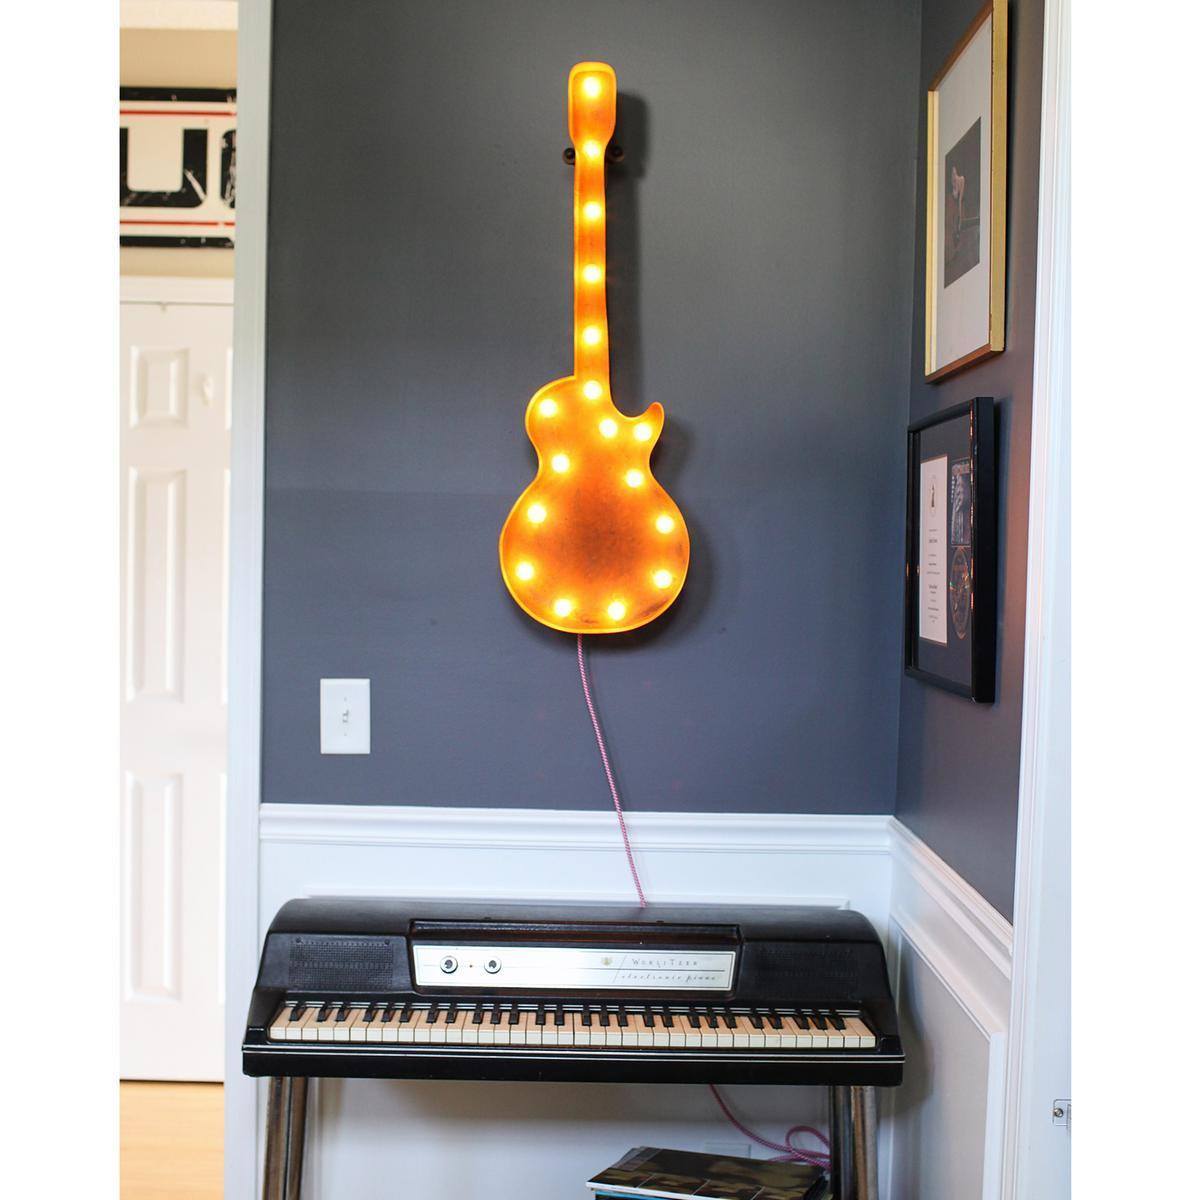 with Lights Marquee Large - Buy The Online Marquee Vintage - 36” Rusty Marquee Guitar (Rustic) Lights Sign